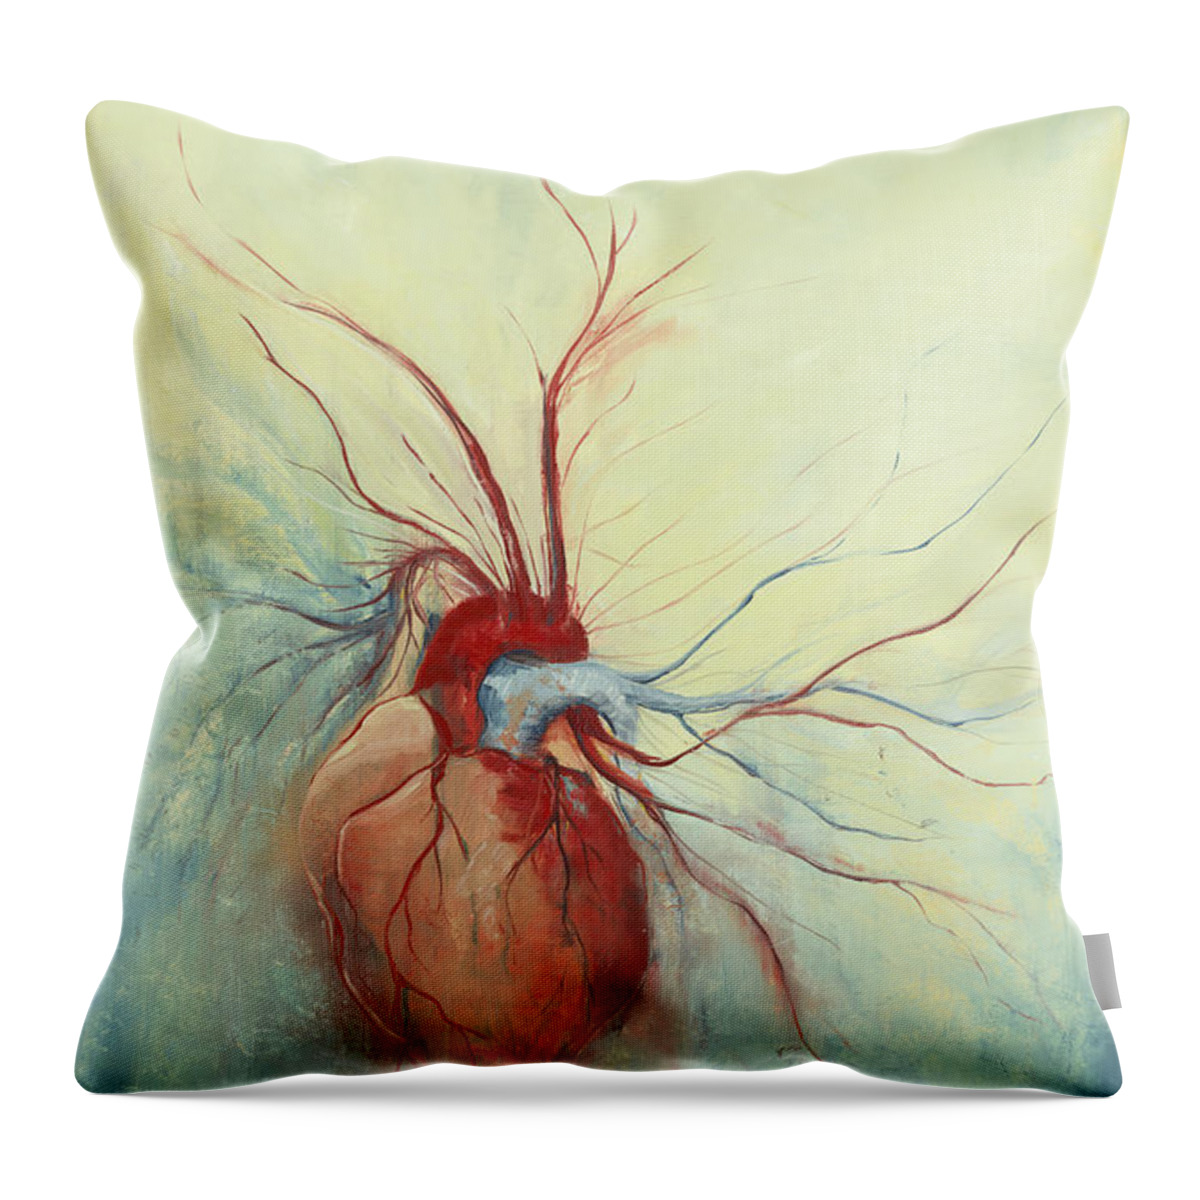 Heart Throw Pillow featuring the painting Determination by Priscilla Jo